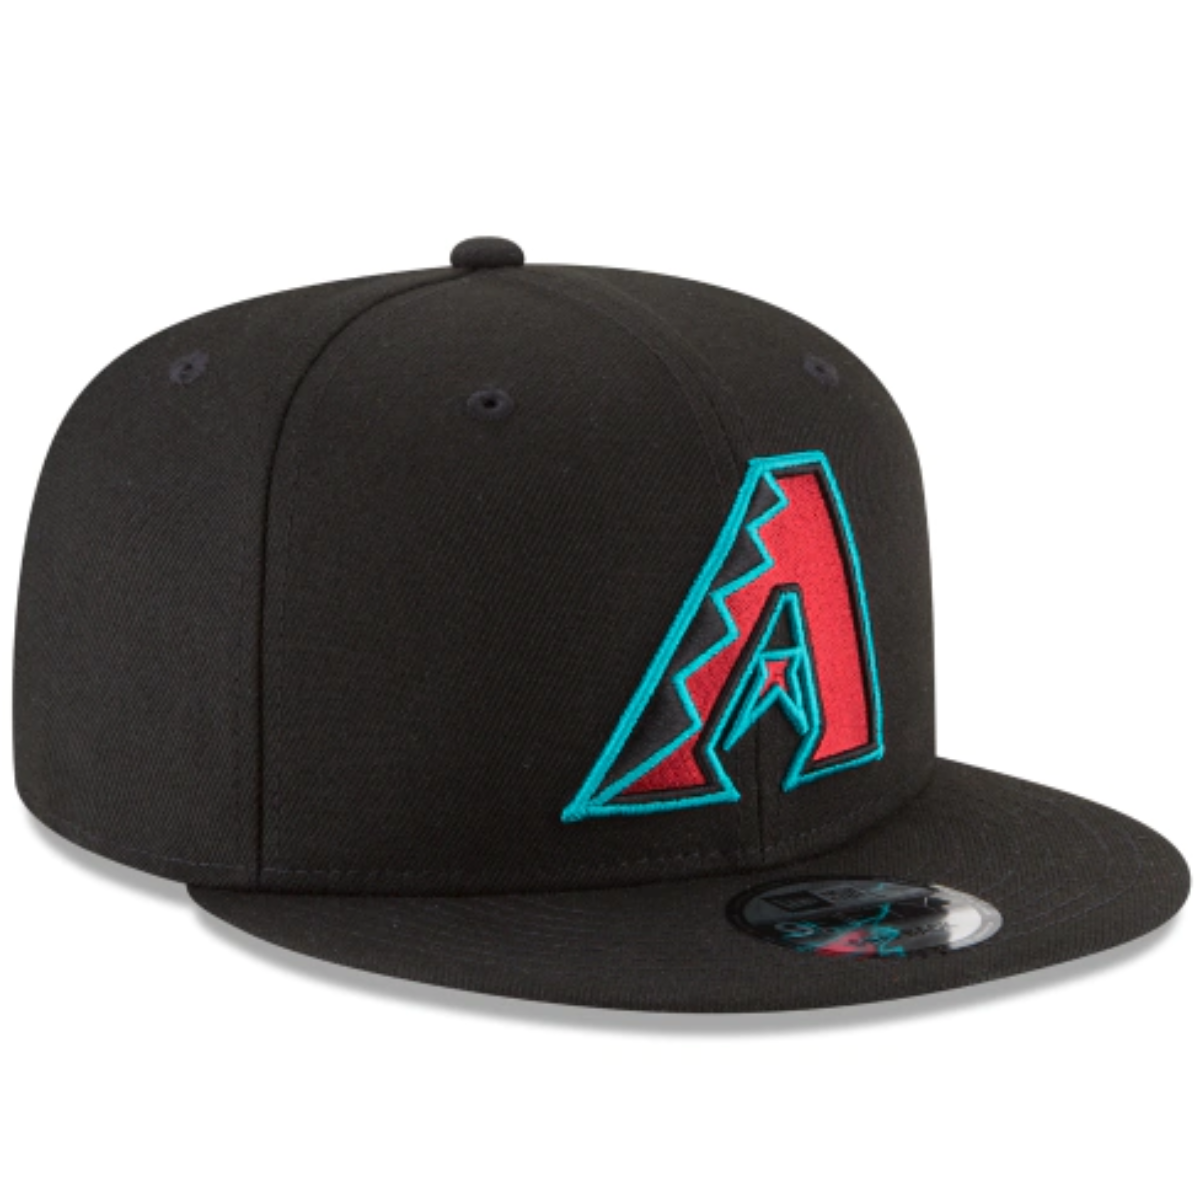 ARIZONA DIAMONDBACKS NEW ERA HOME AUTHENTIC COLLECTION 9FIFTY  ON-FIELD COLLECTION BLACK/CYAN NVSOCCER.COM THE COLISEUM